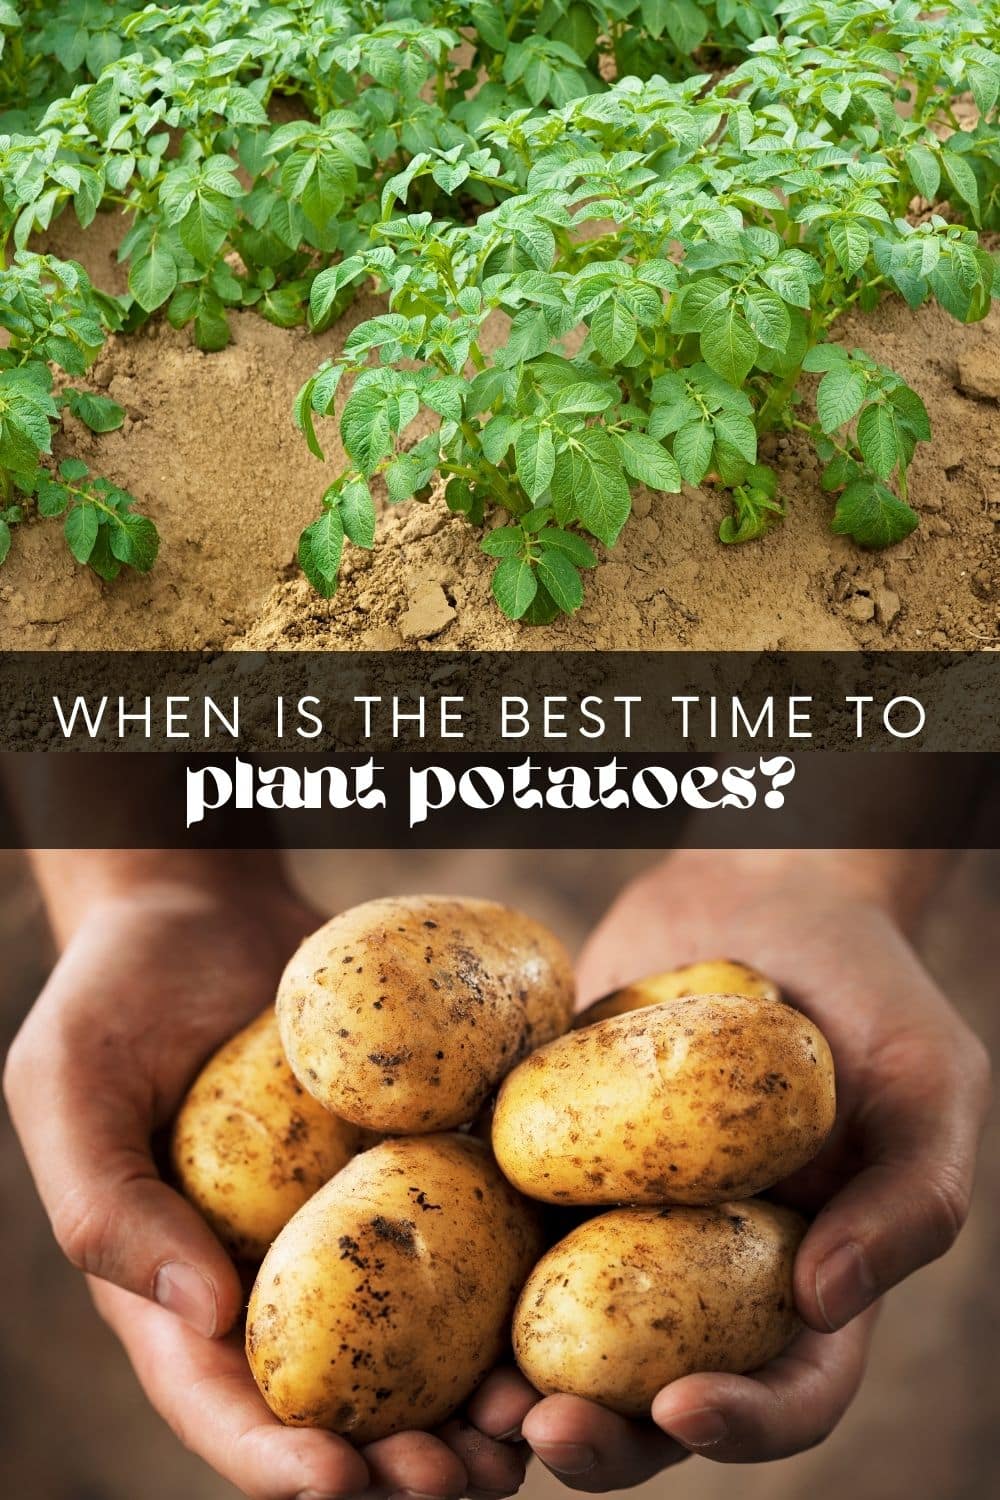 We all love potatoes, right? Whether they're mashed, boiled, roasted, or baked – potatoes are a staple food for many families. And growing your own potatoes is not as difficult as it might seem! In fact, potatoes are pretty low-maintenance vegetables and can be grown in your garden or even in pots. But how long do potatoes take to grow?